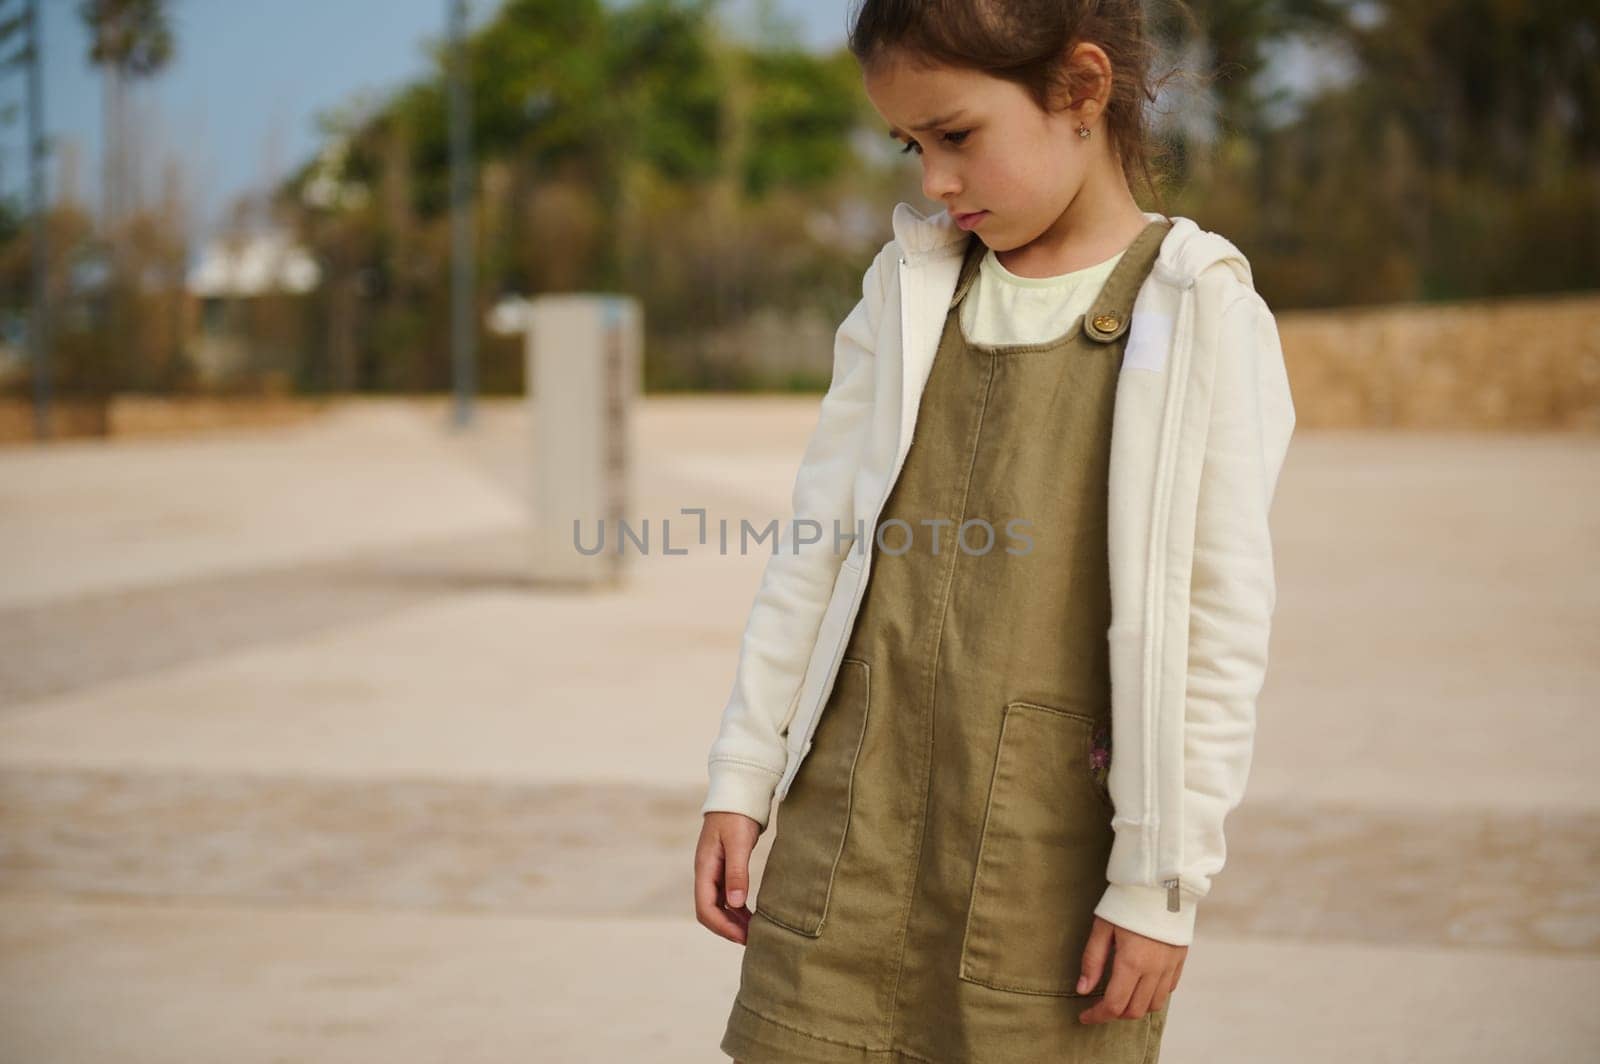 Portrait of a child girl in khaki dress and beige hoodie, looking down, expressing sadness standing on urban background by artgf